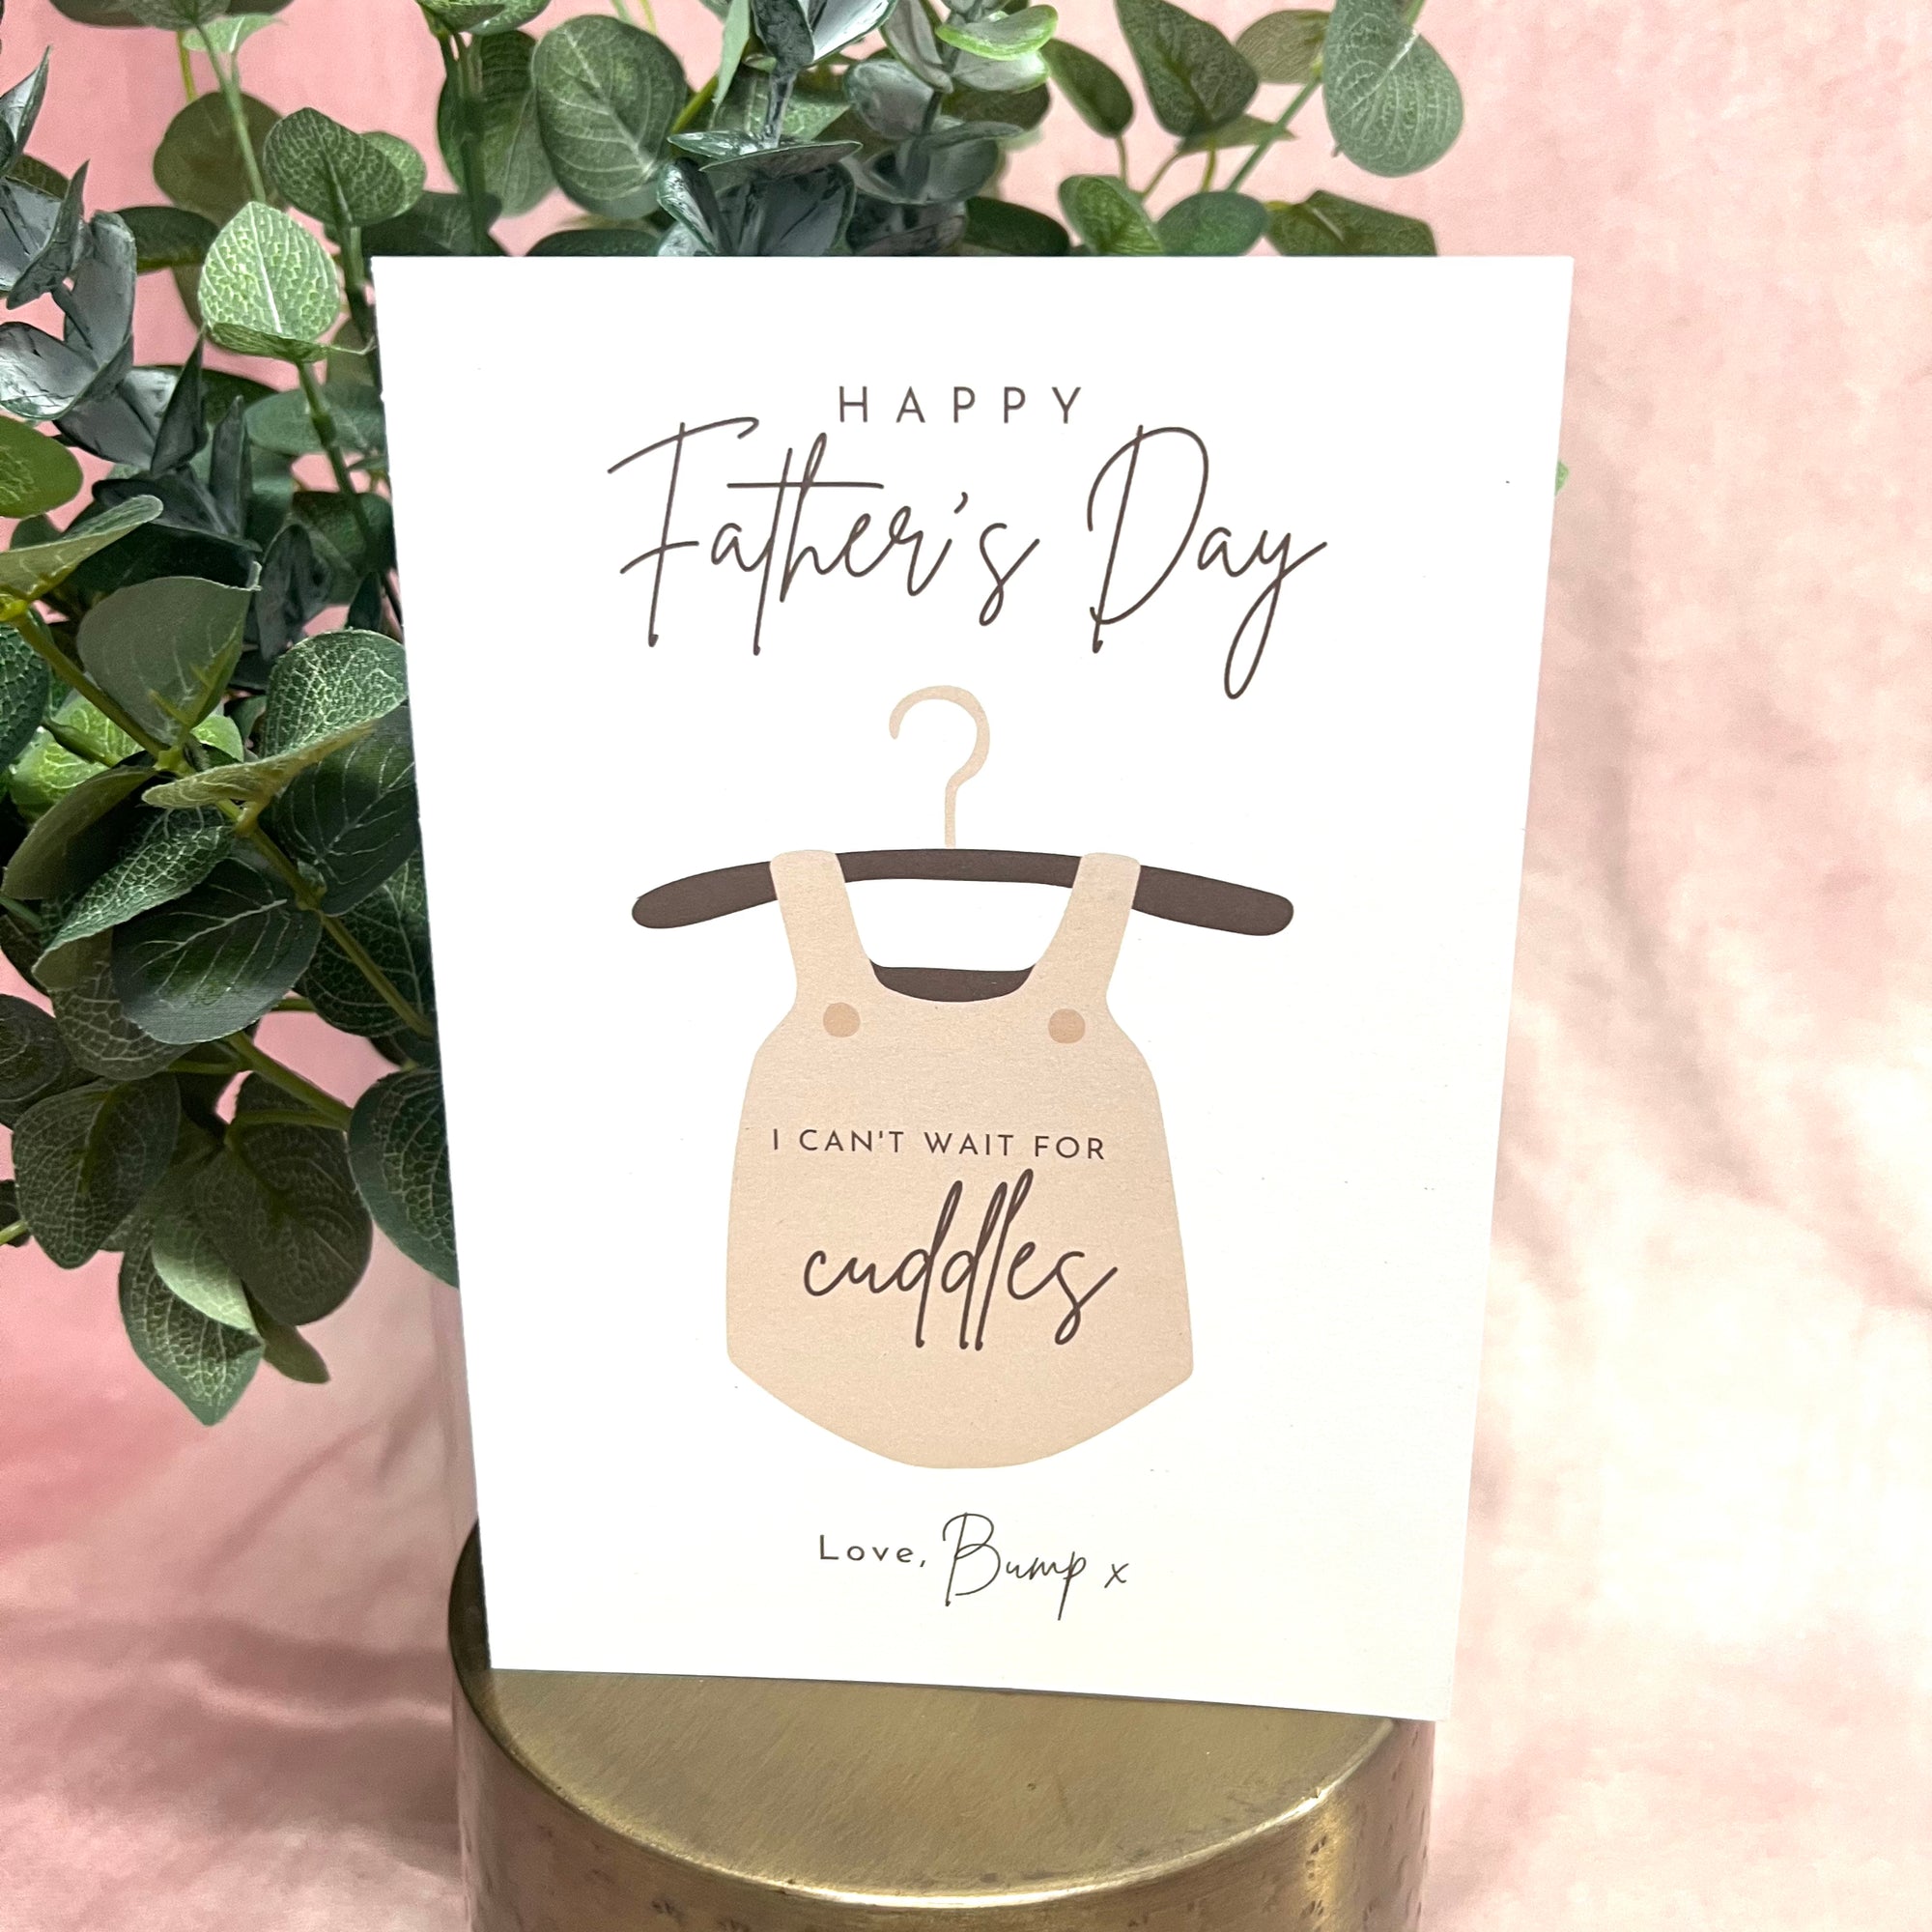 Happy Father's Day (from The Bump) Greeting Card ☘️